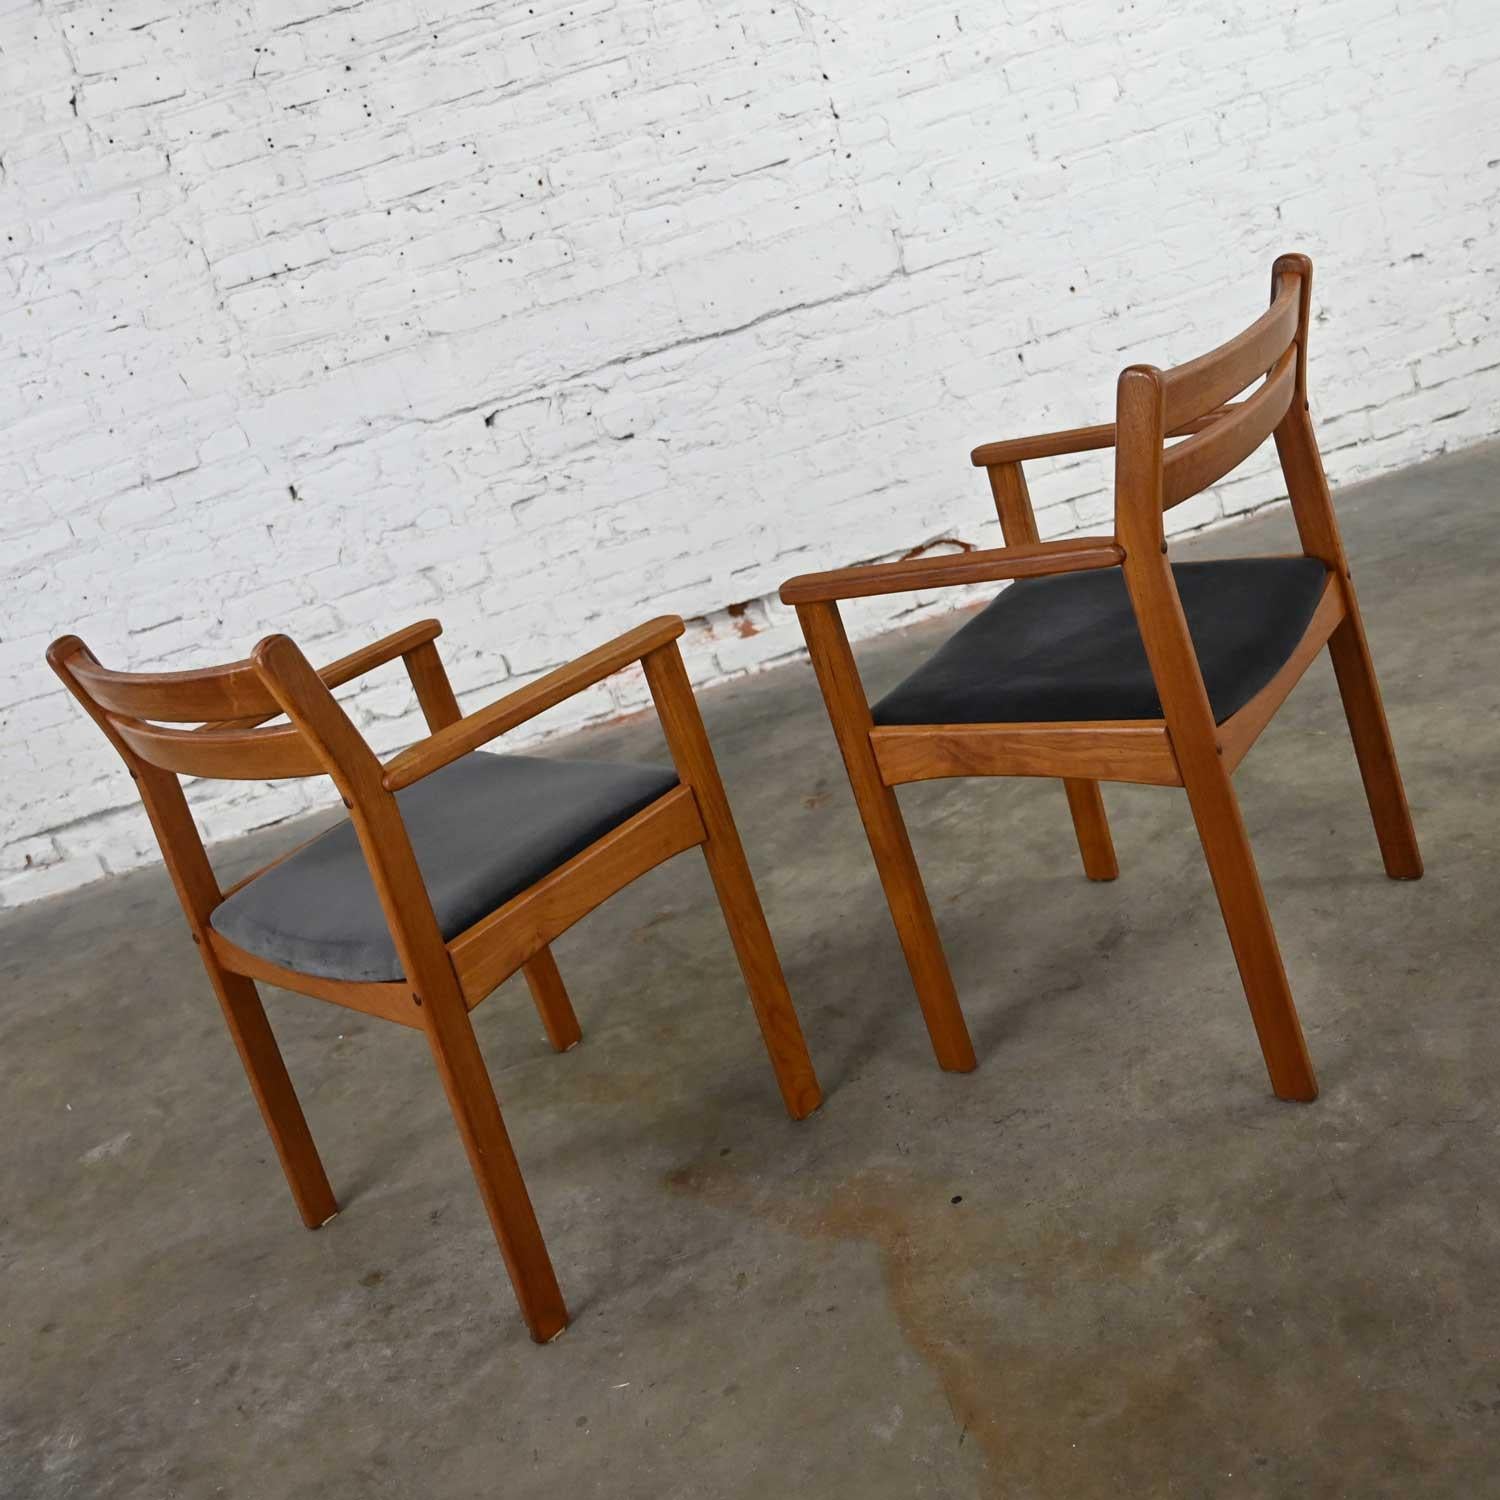 Scandinavian Modern Teak Pair of Armchairs with Brushed Charcoal Fabric Seats In Good Condition For Sale In Topeka, KS